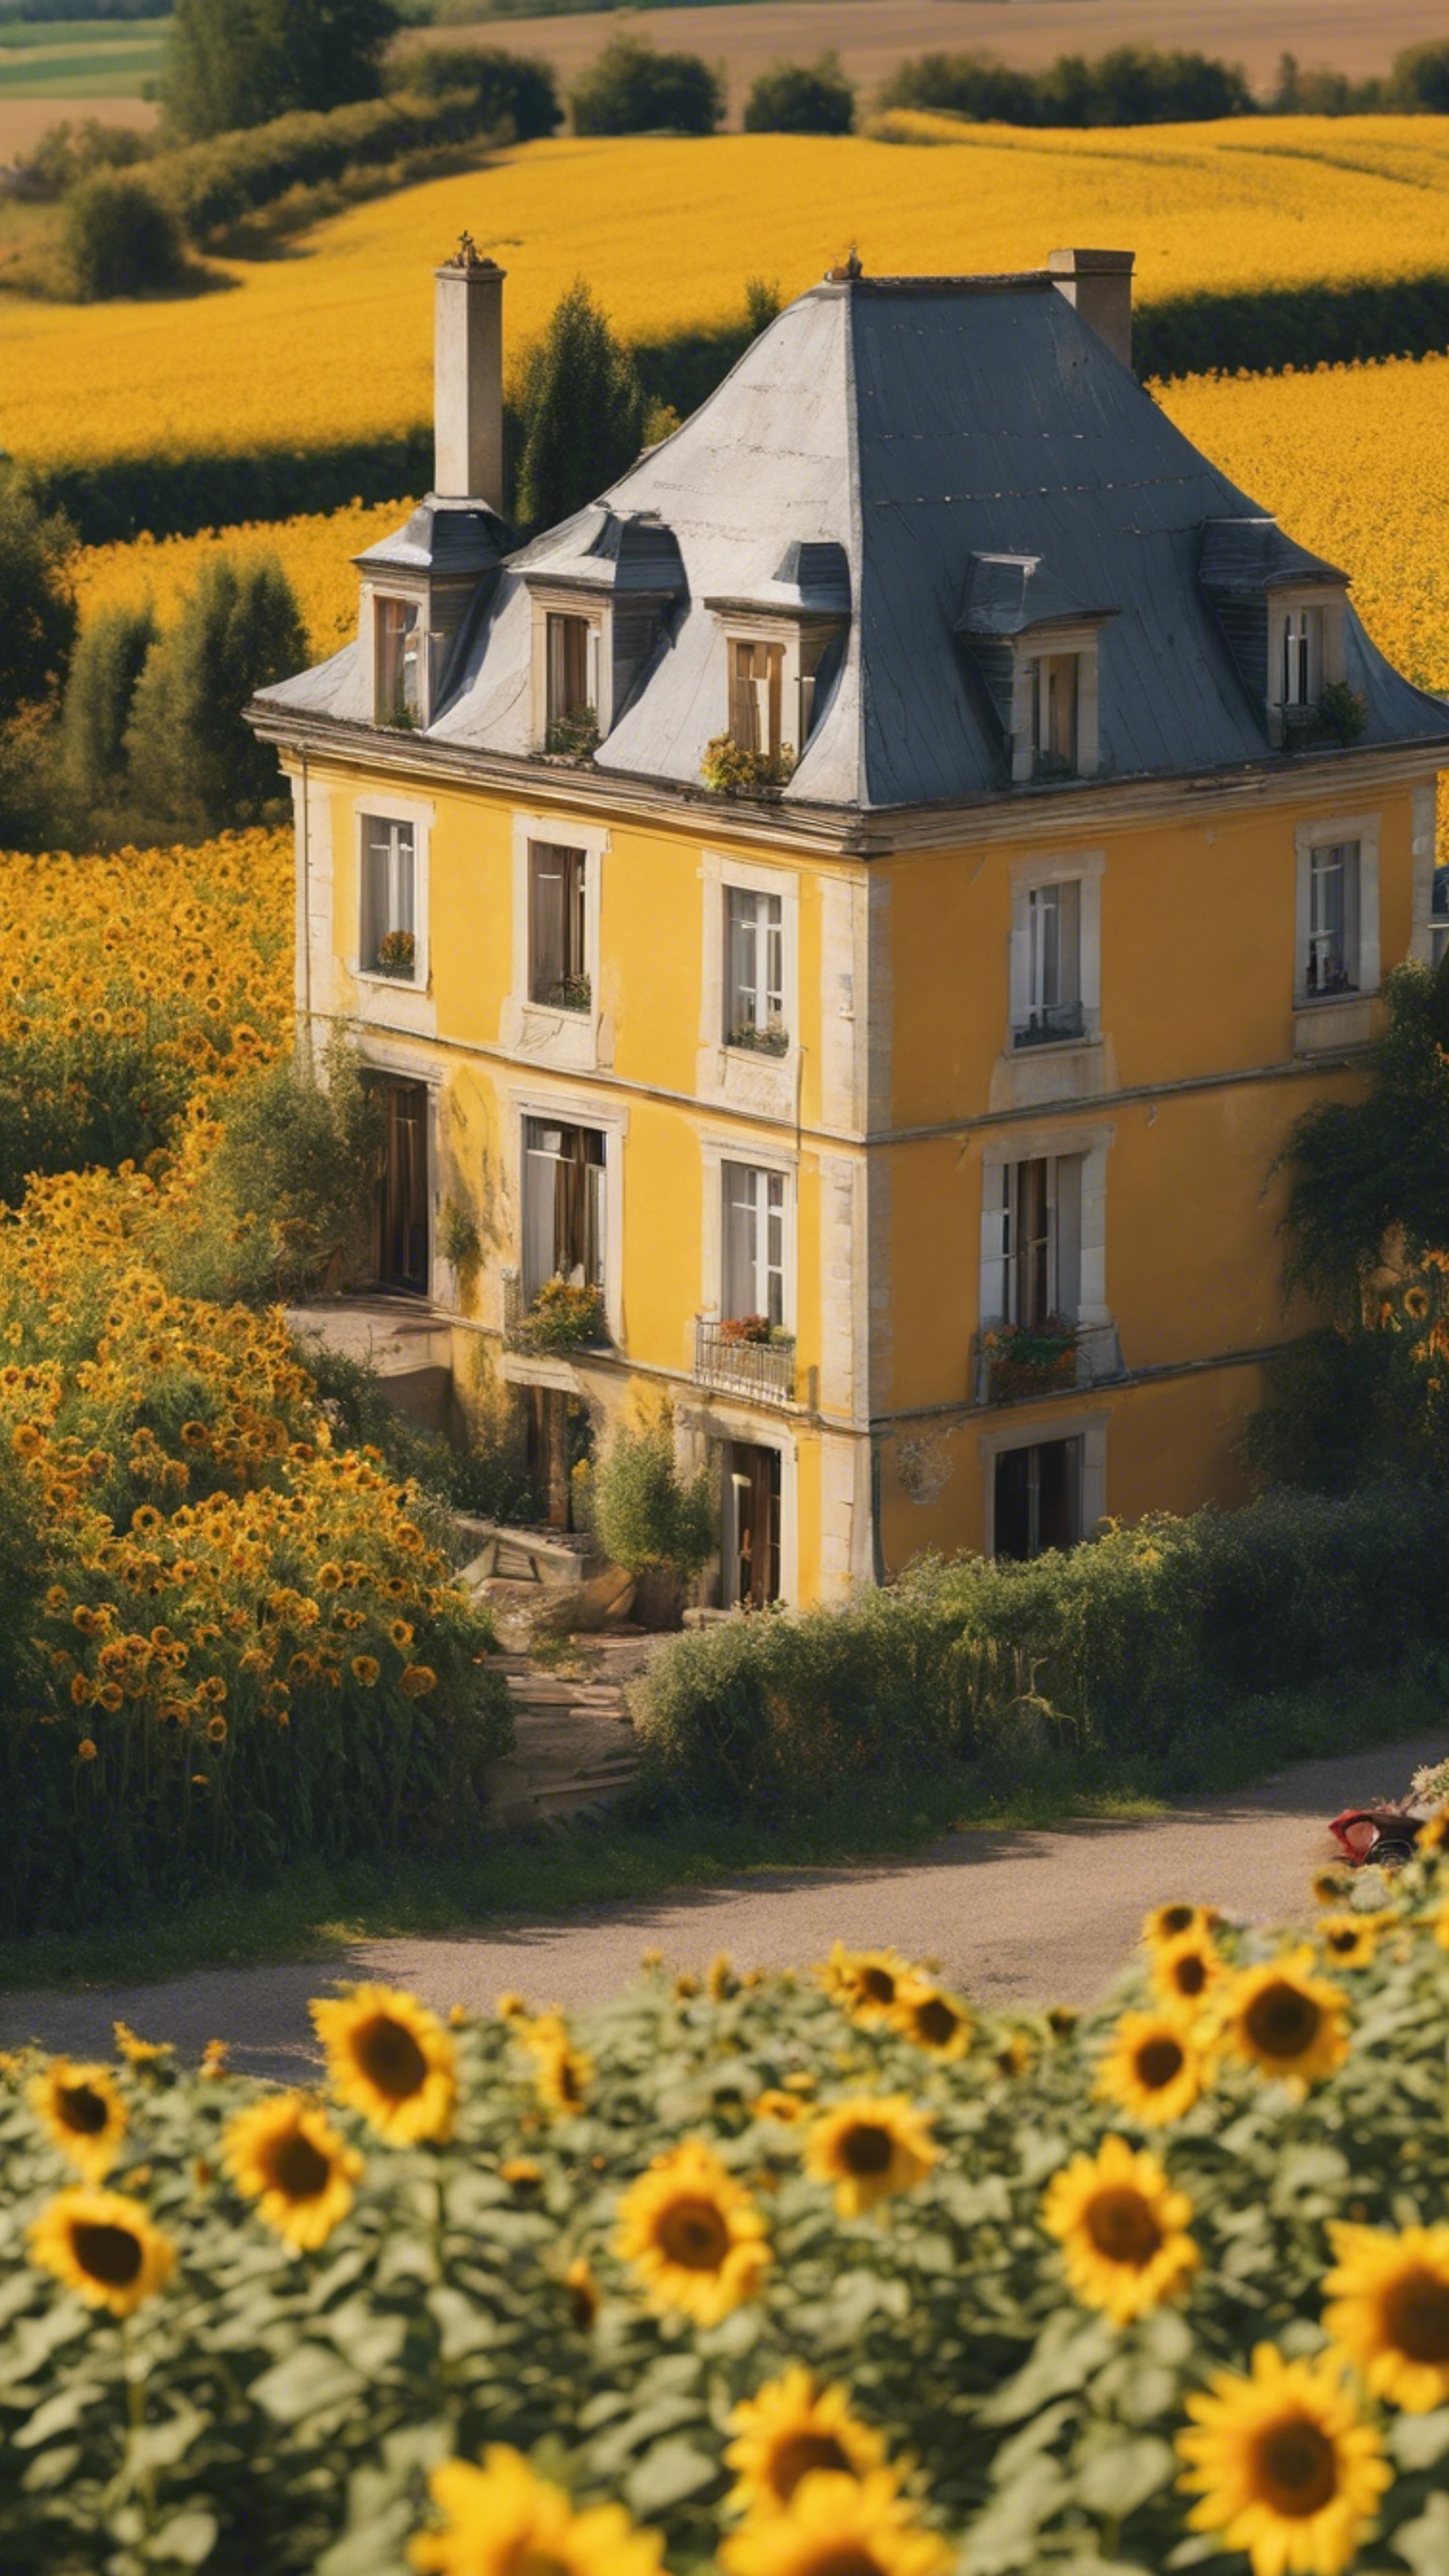 A quaint French country house nestled in a field of bright yellow sunflowers during a sunny afternoon. Tapeta[7540a515ea0143d58f51]